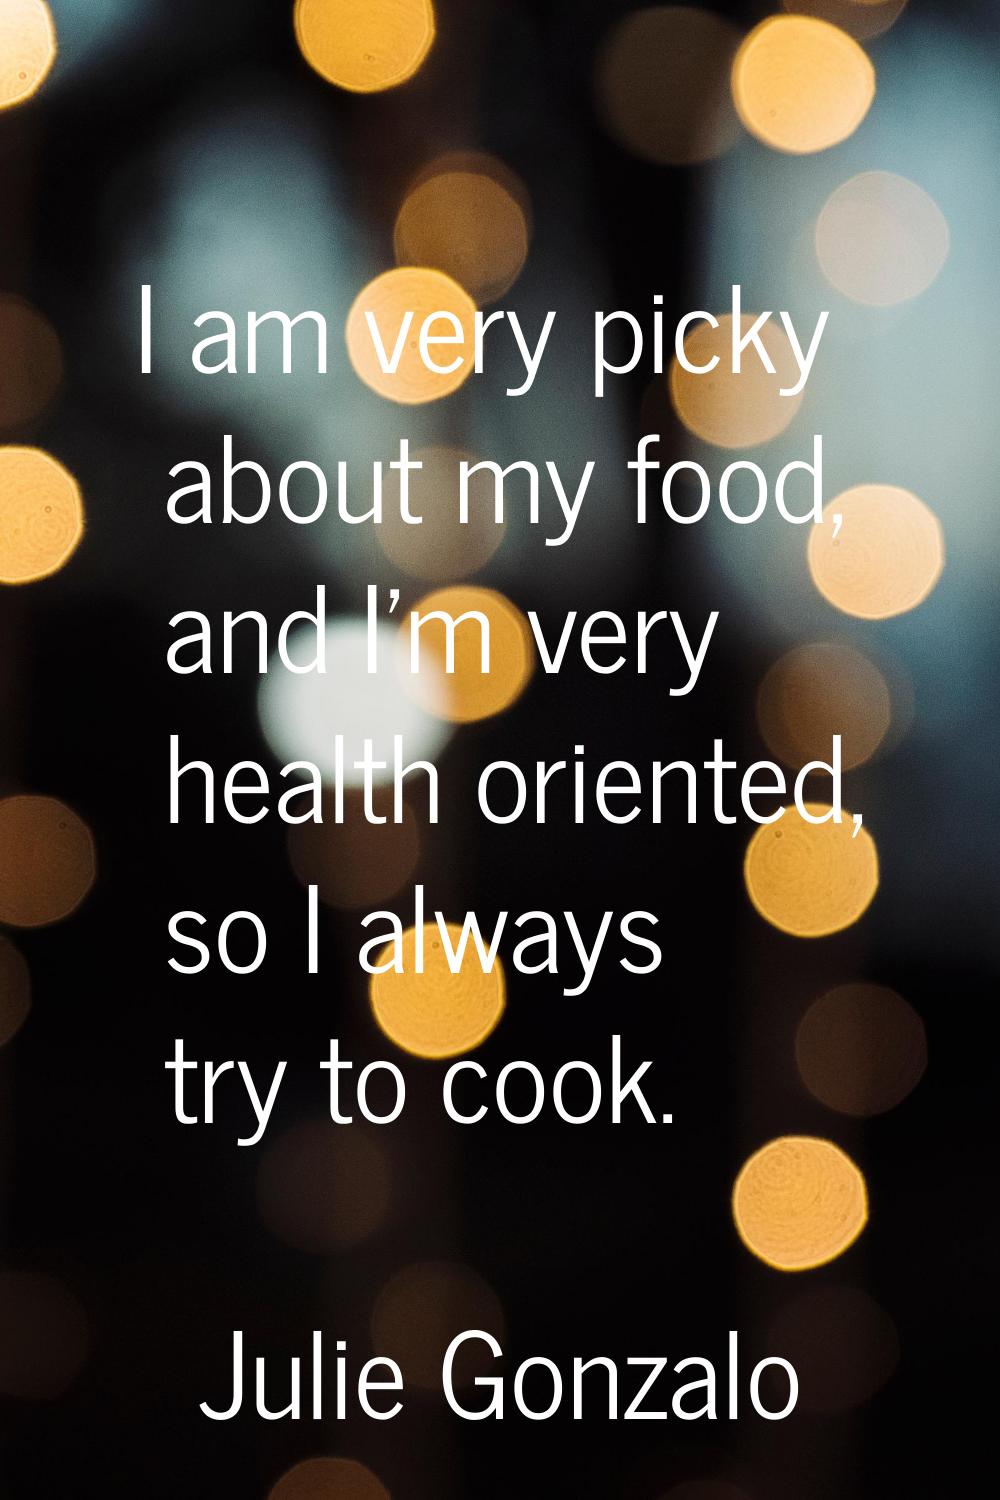 I am very picky about my food, and I'm very health oriented, so I always try to cook.